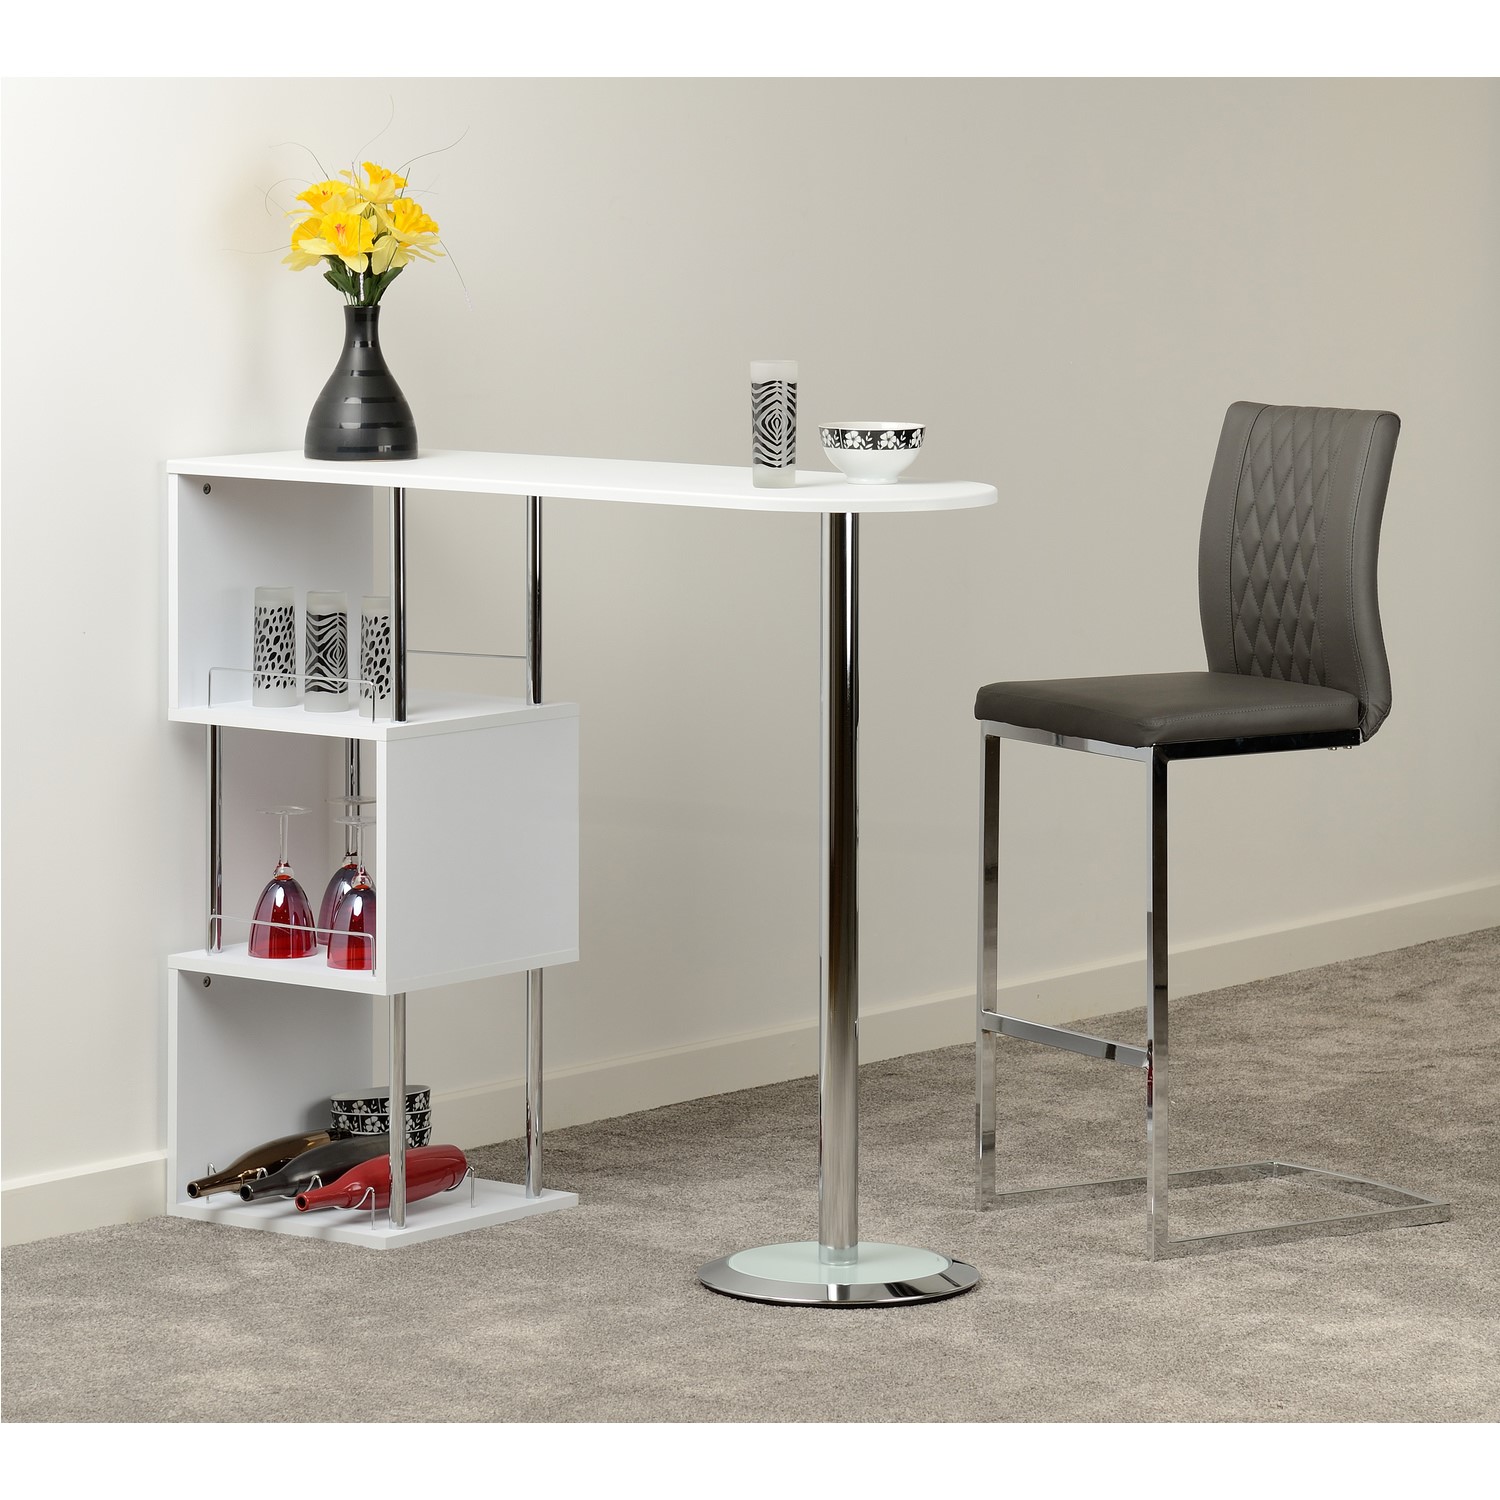 Photo of White breakfast bar table with shelving - charisma